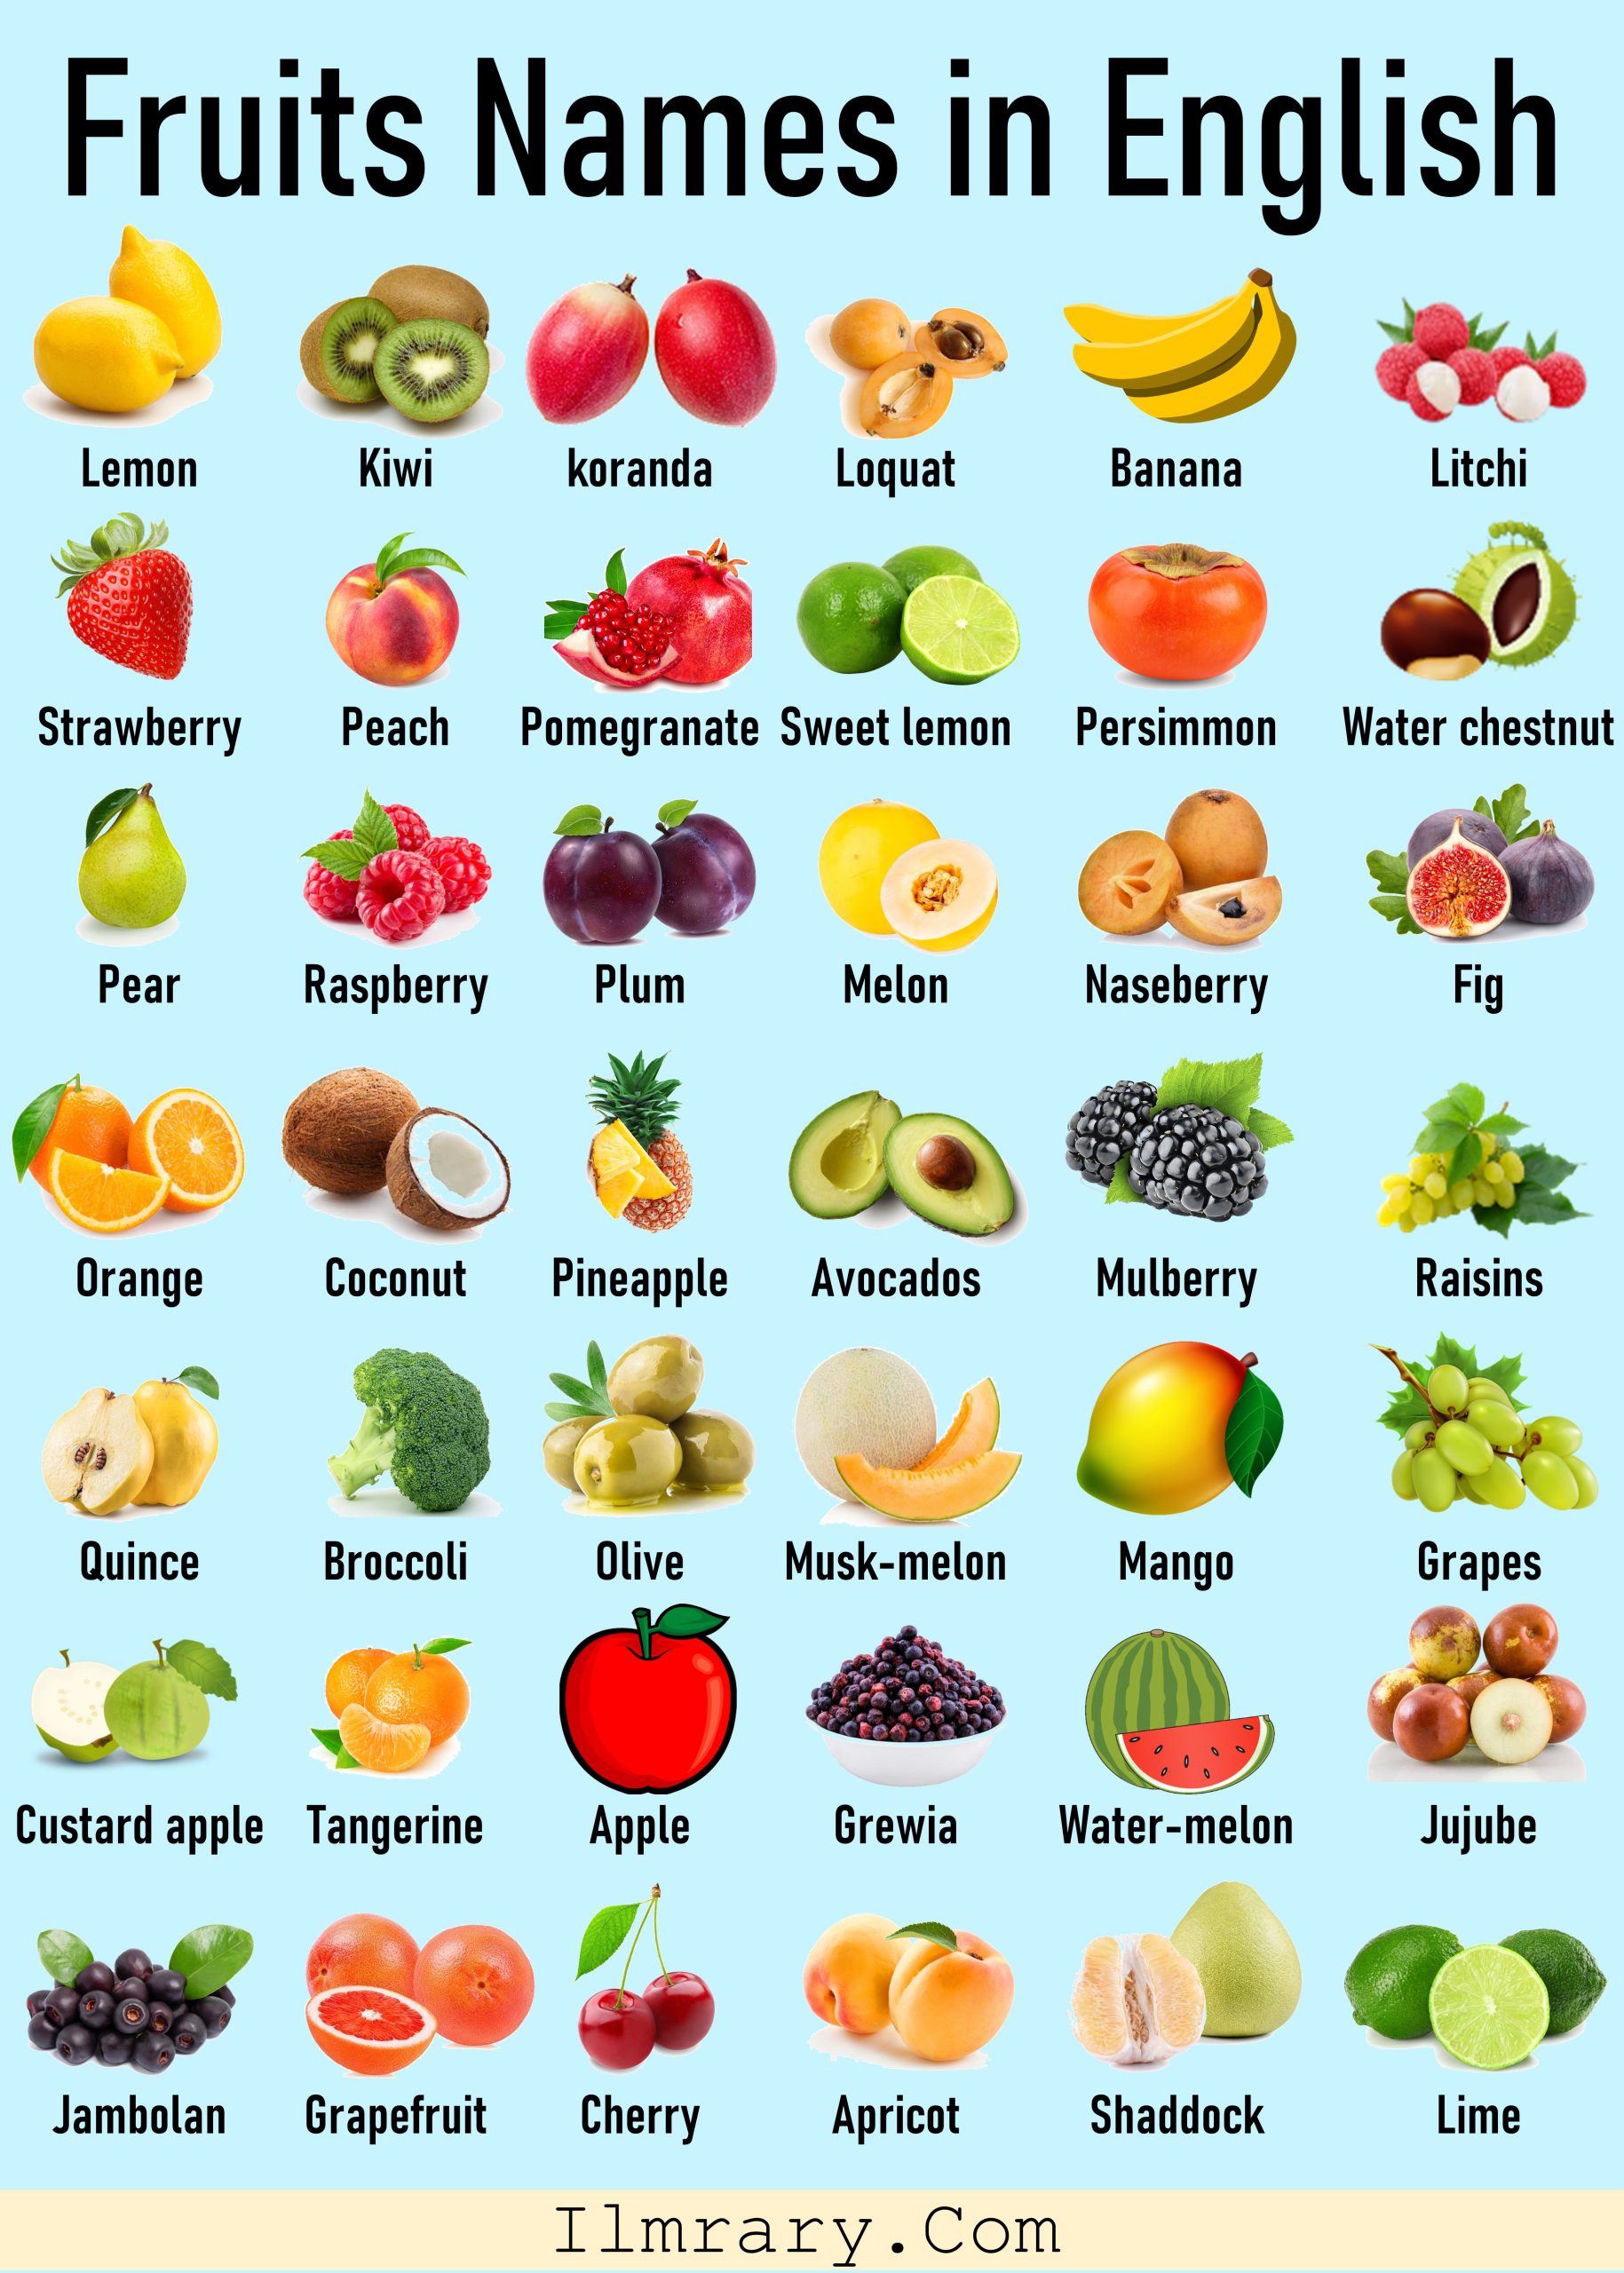 List of Fruits Names in English with Pictures | Fruits Vocabulary